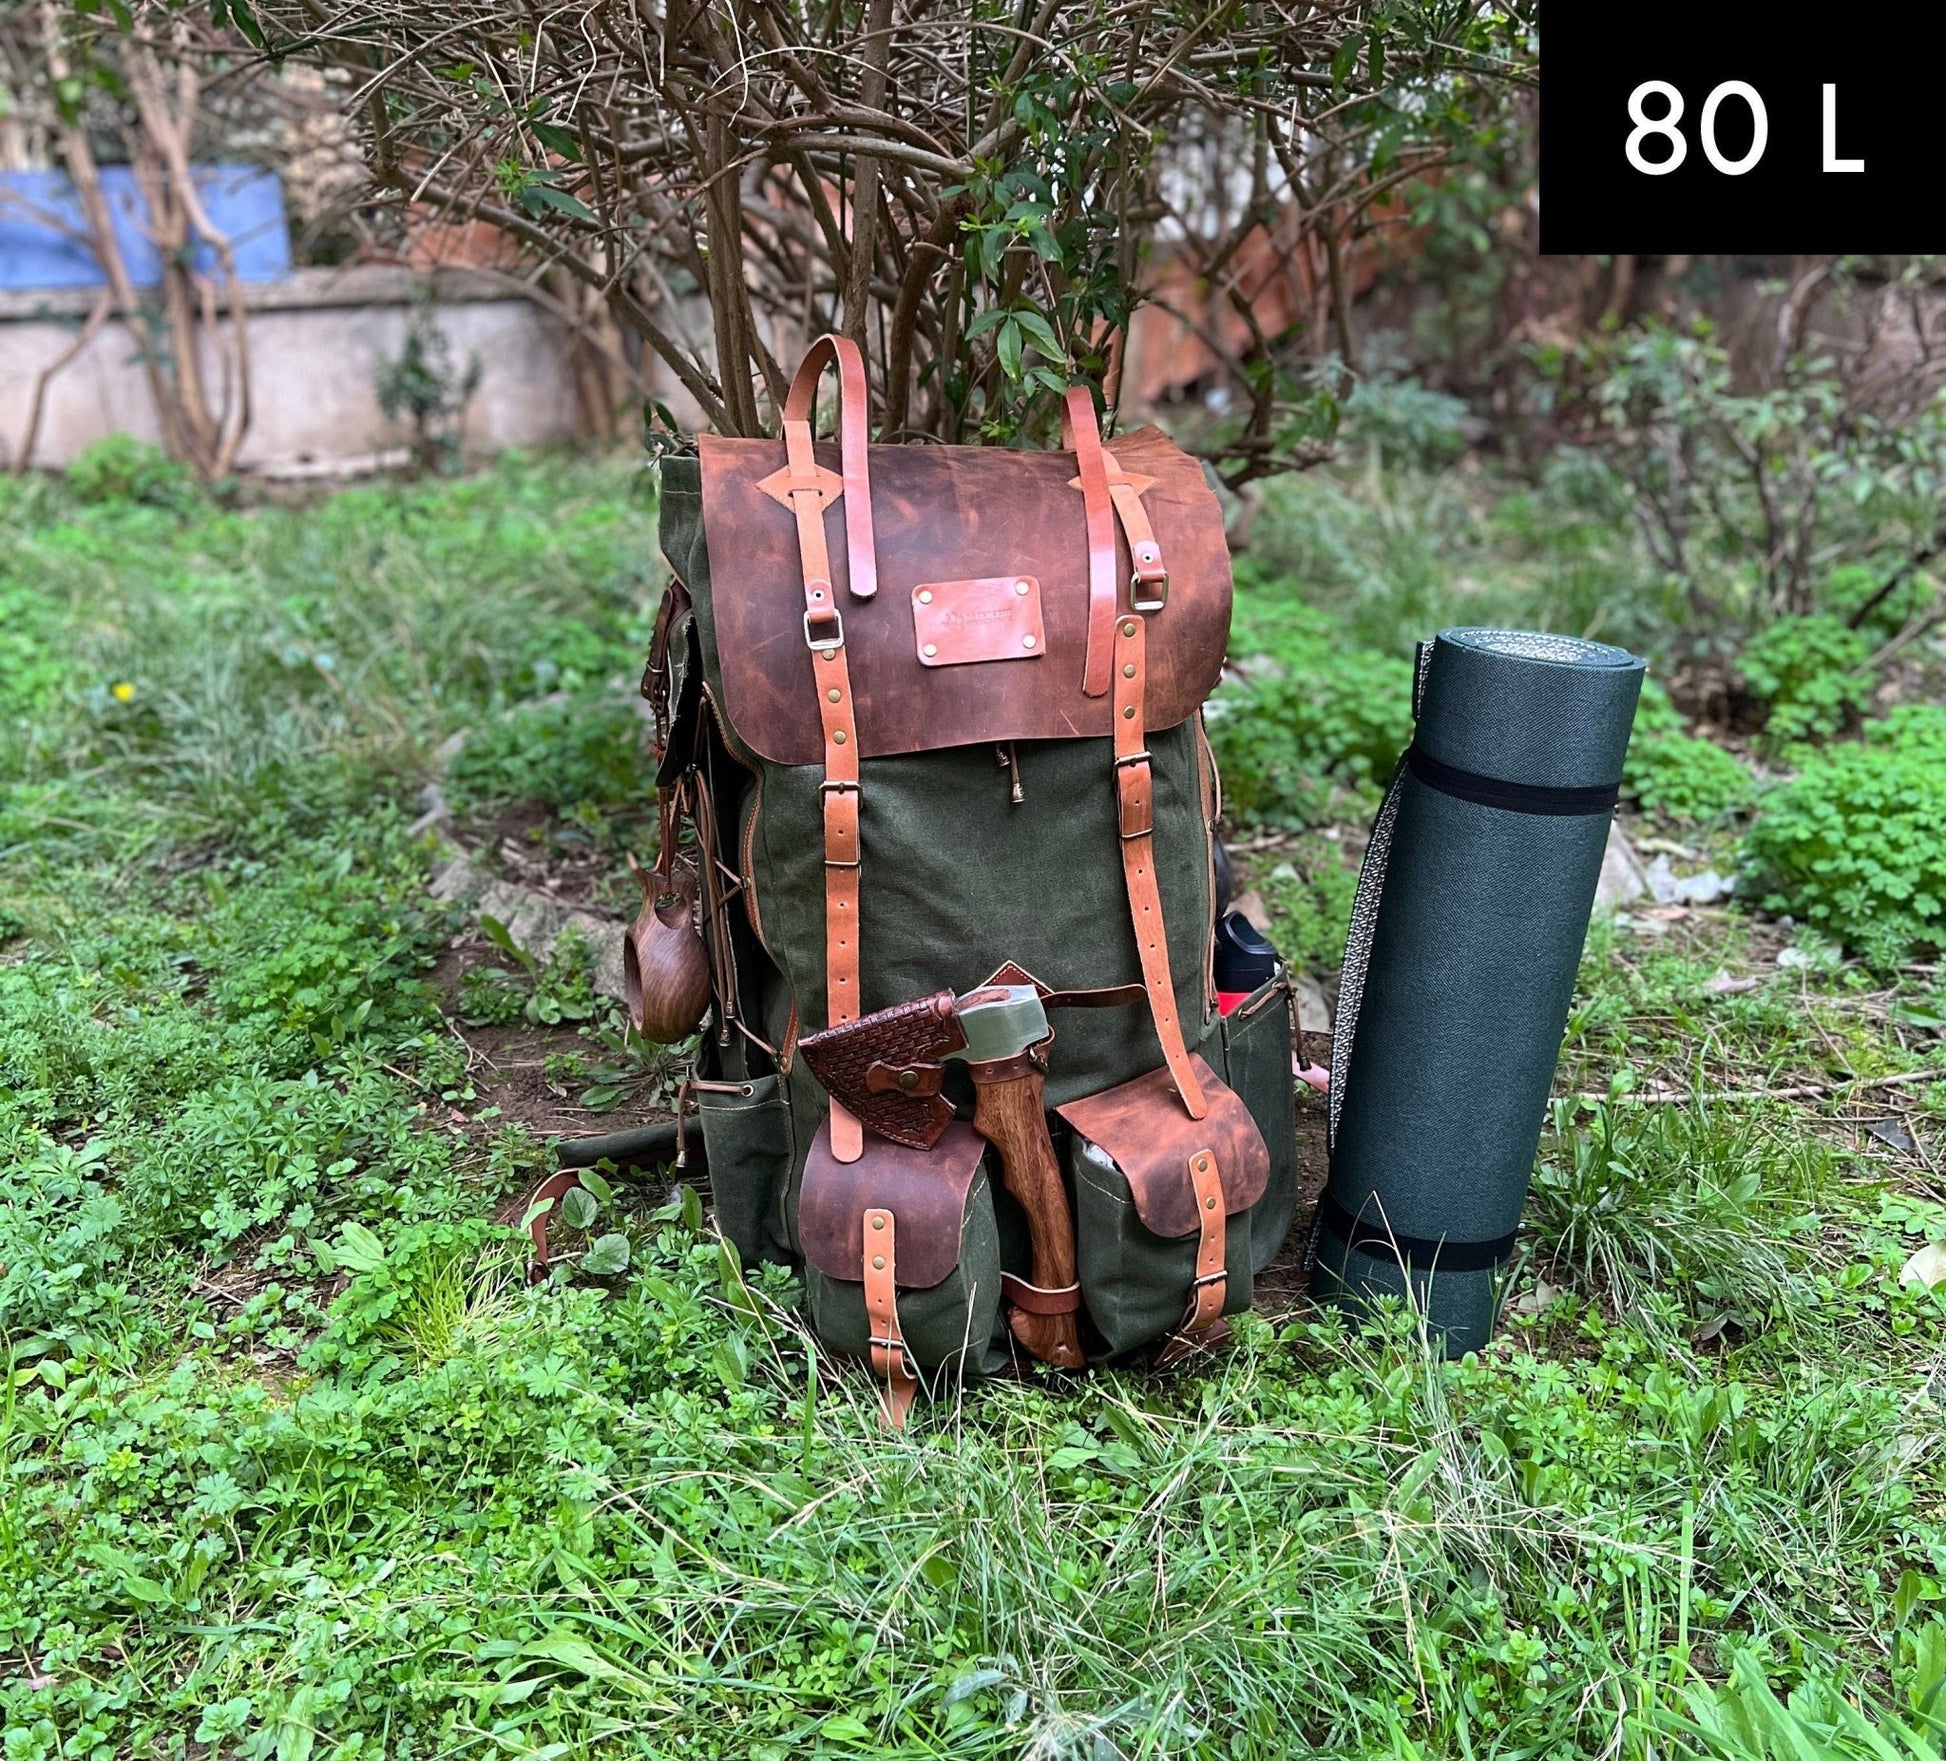 30 Liter to 80 Liter Bushcraft Backpack  Camping Backpack Hiking backpack Canvas Leather Backpack with Black-Brown-Green options,  99percenthandmade   